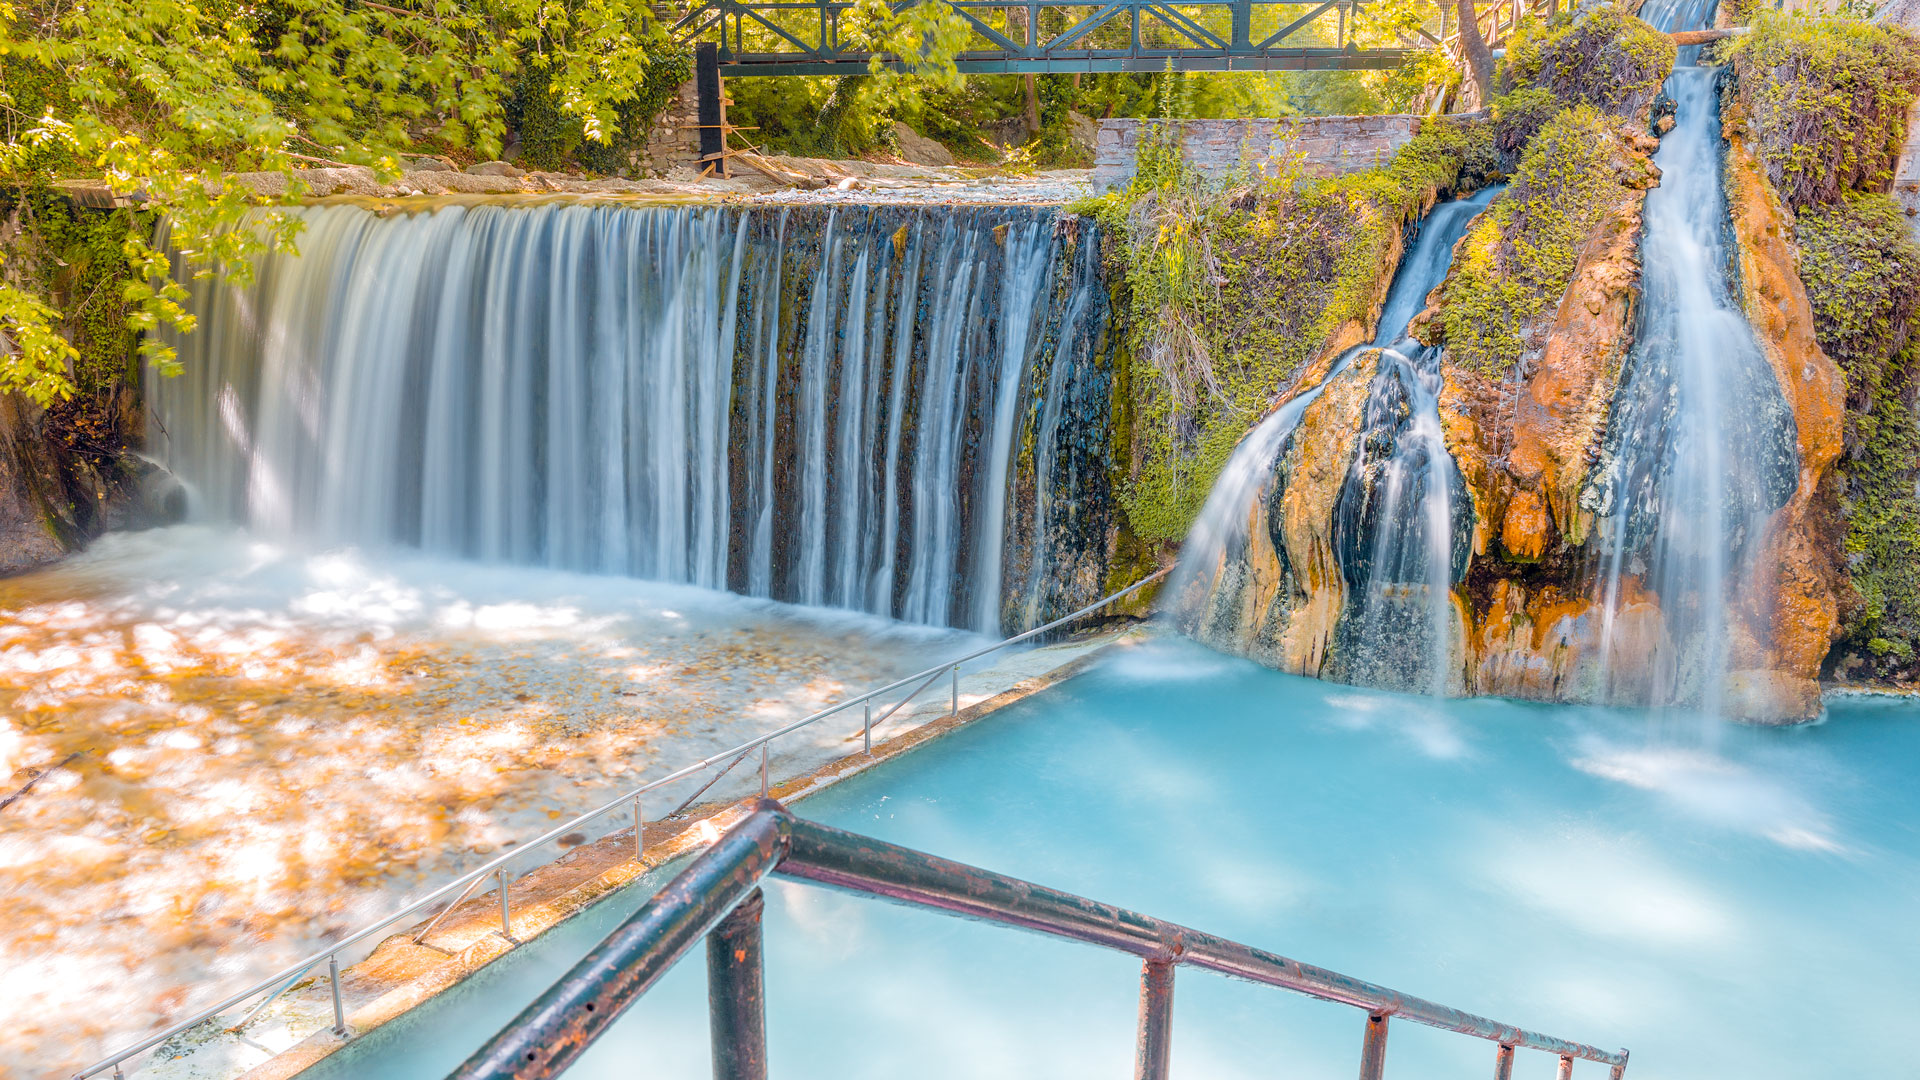 Seize the moment for a complete revitalization at the natural spas of Pozar-Loutraki Thermal Springs